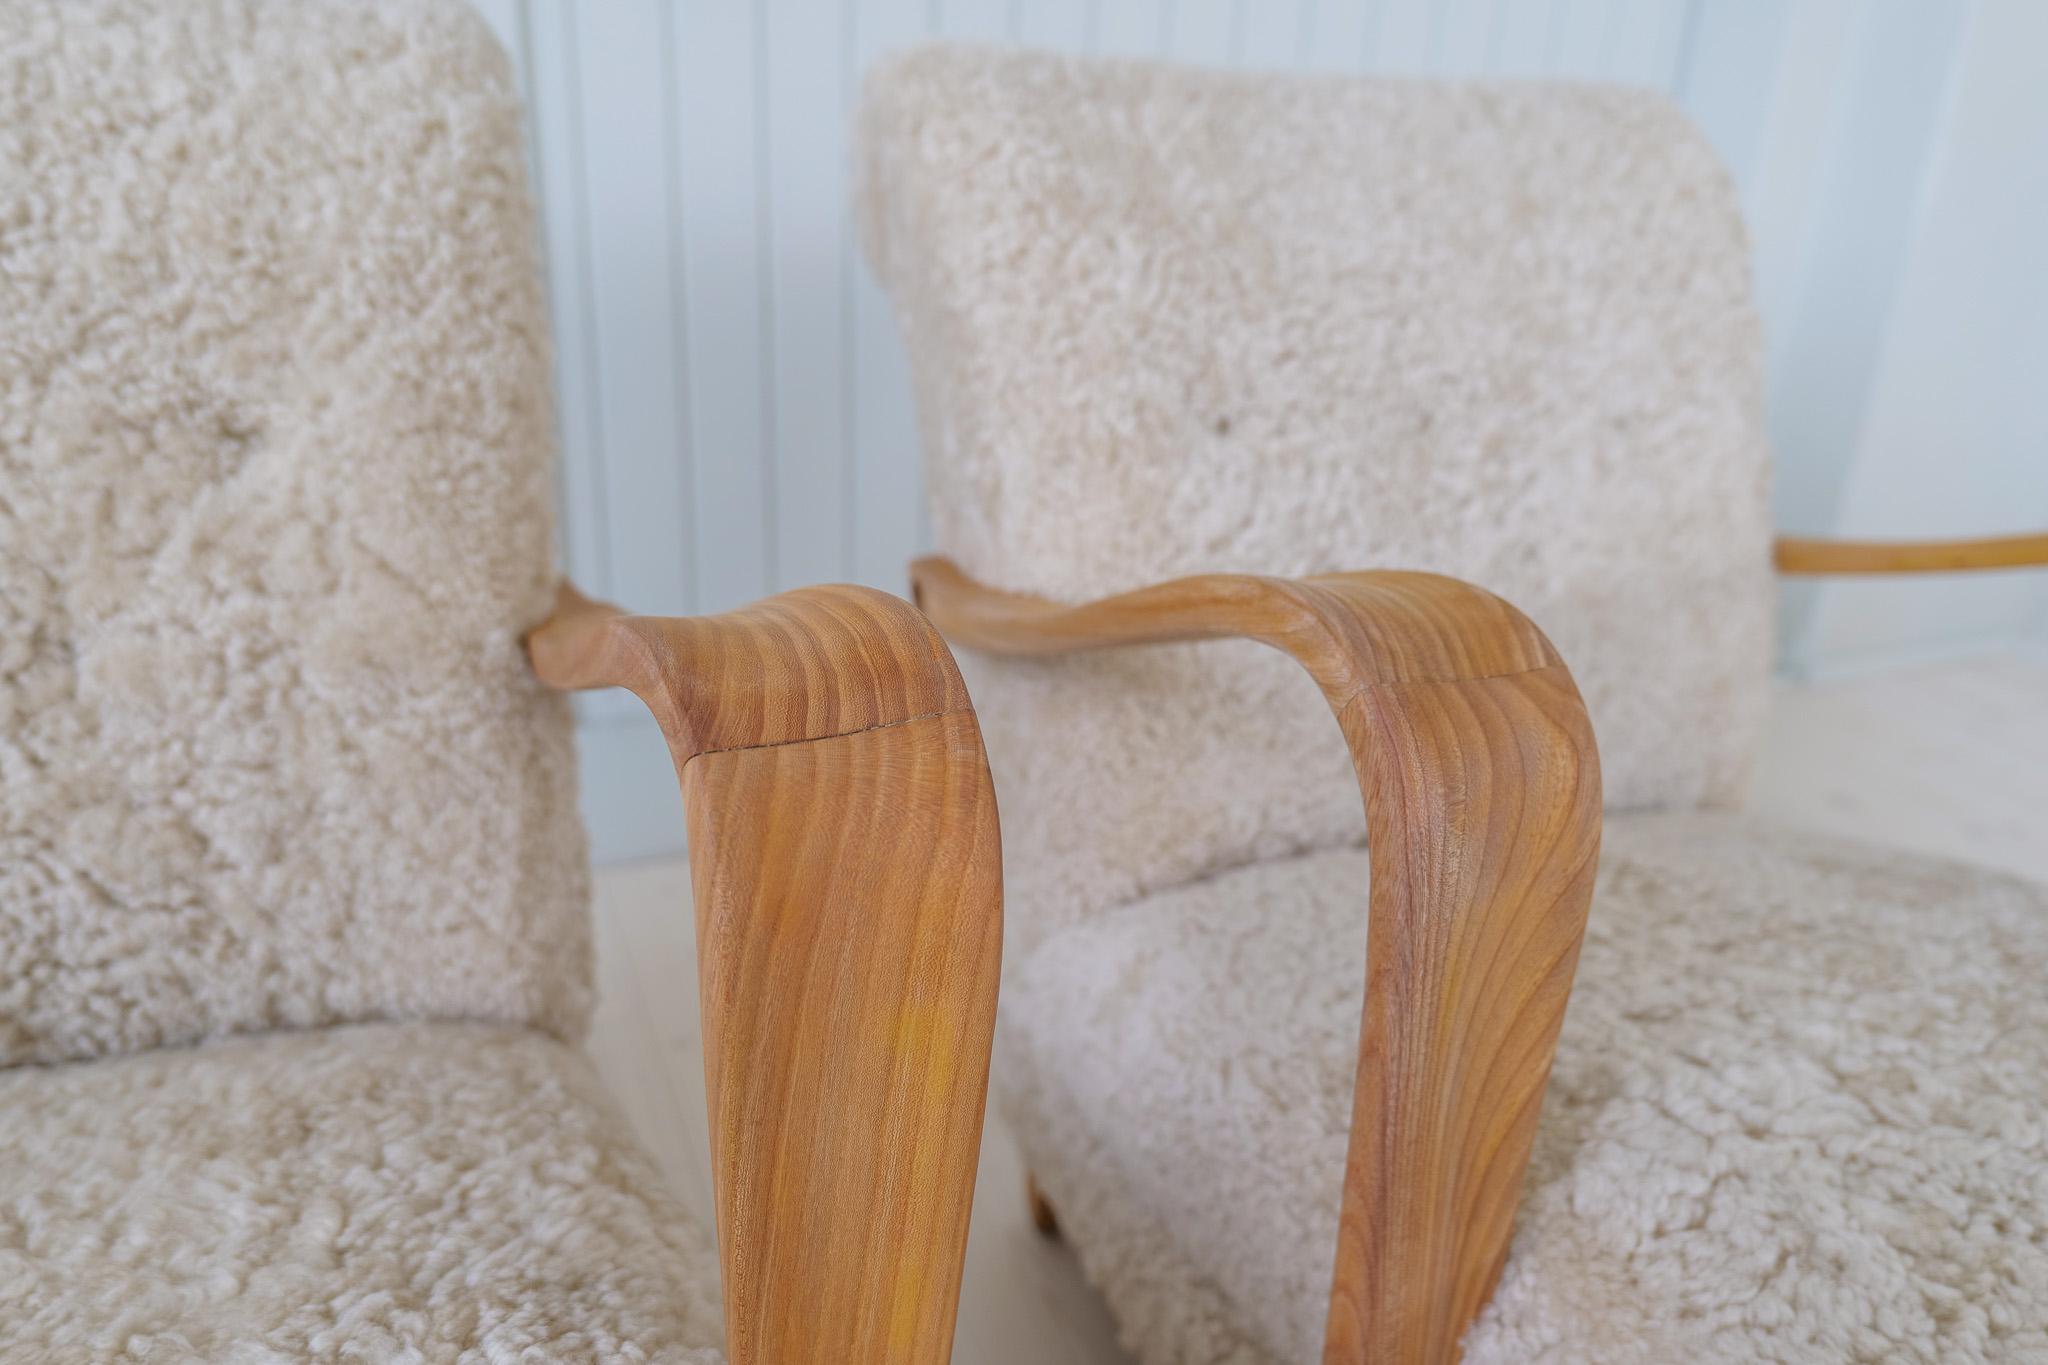 Swedish Modern Lounge Chairs in Shearling / Sheepskin and Elm, 1940s For Sale 2